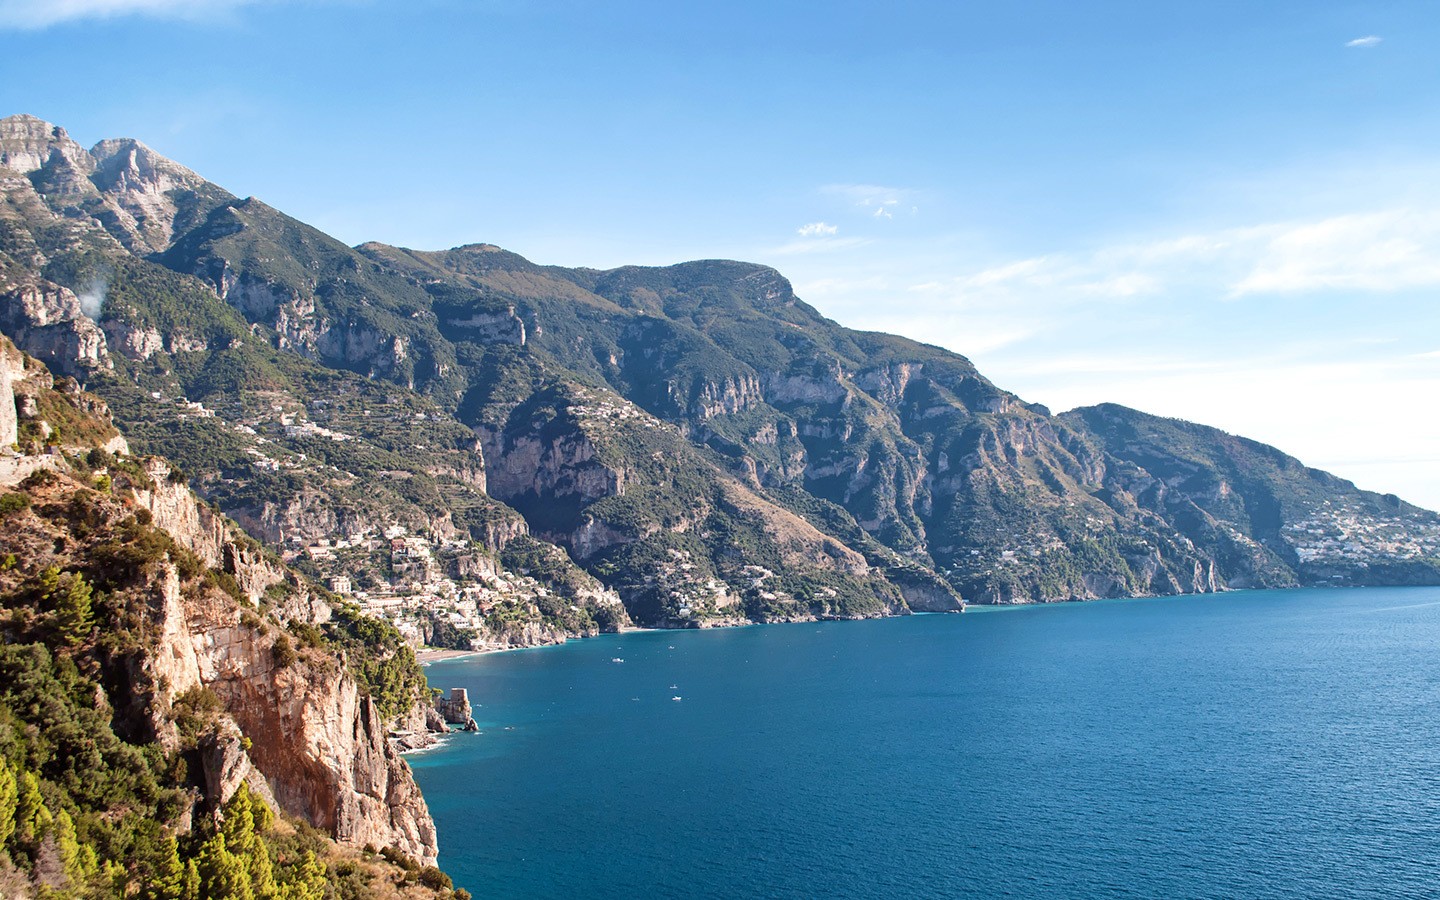 Views down the Amalfi Coast from the SS163 highway